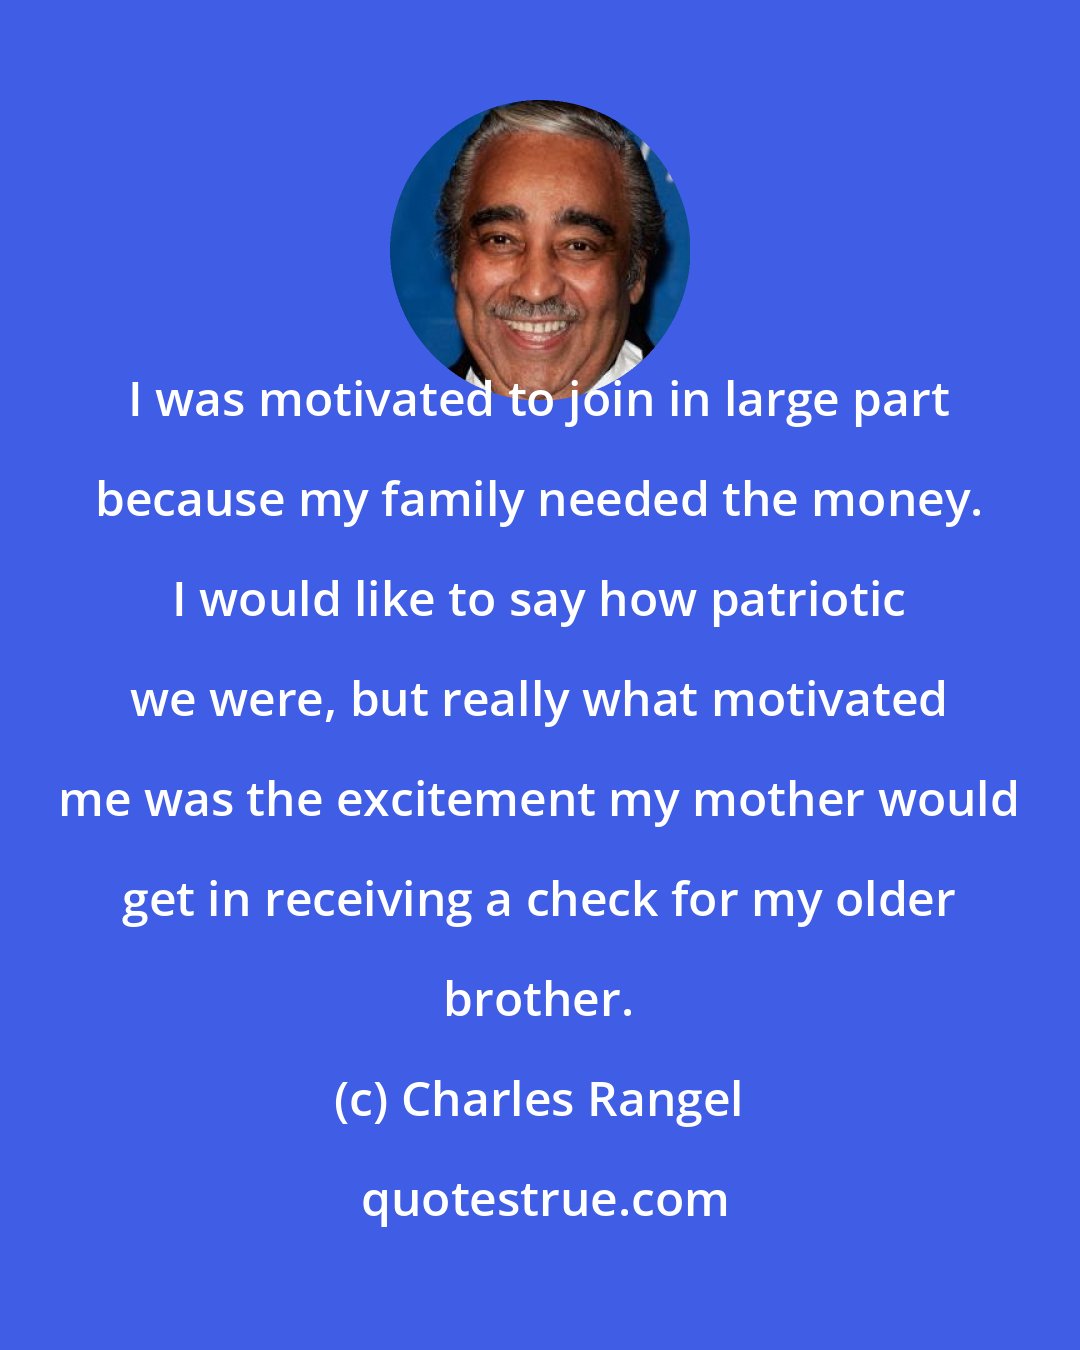 Charles Rangel: I was motivated to join in large part because my family needed the money. I would like to say how patriotic we were, but really what motivated me was the excitement my mother would get in receiving a check for my older brother.